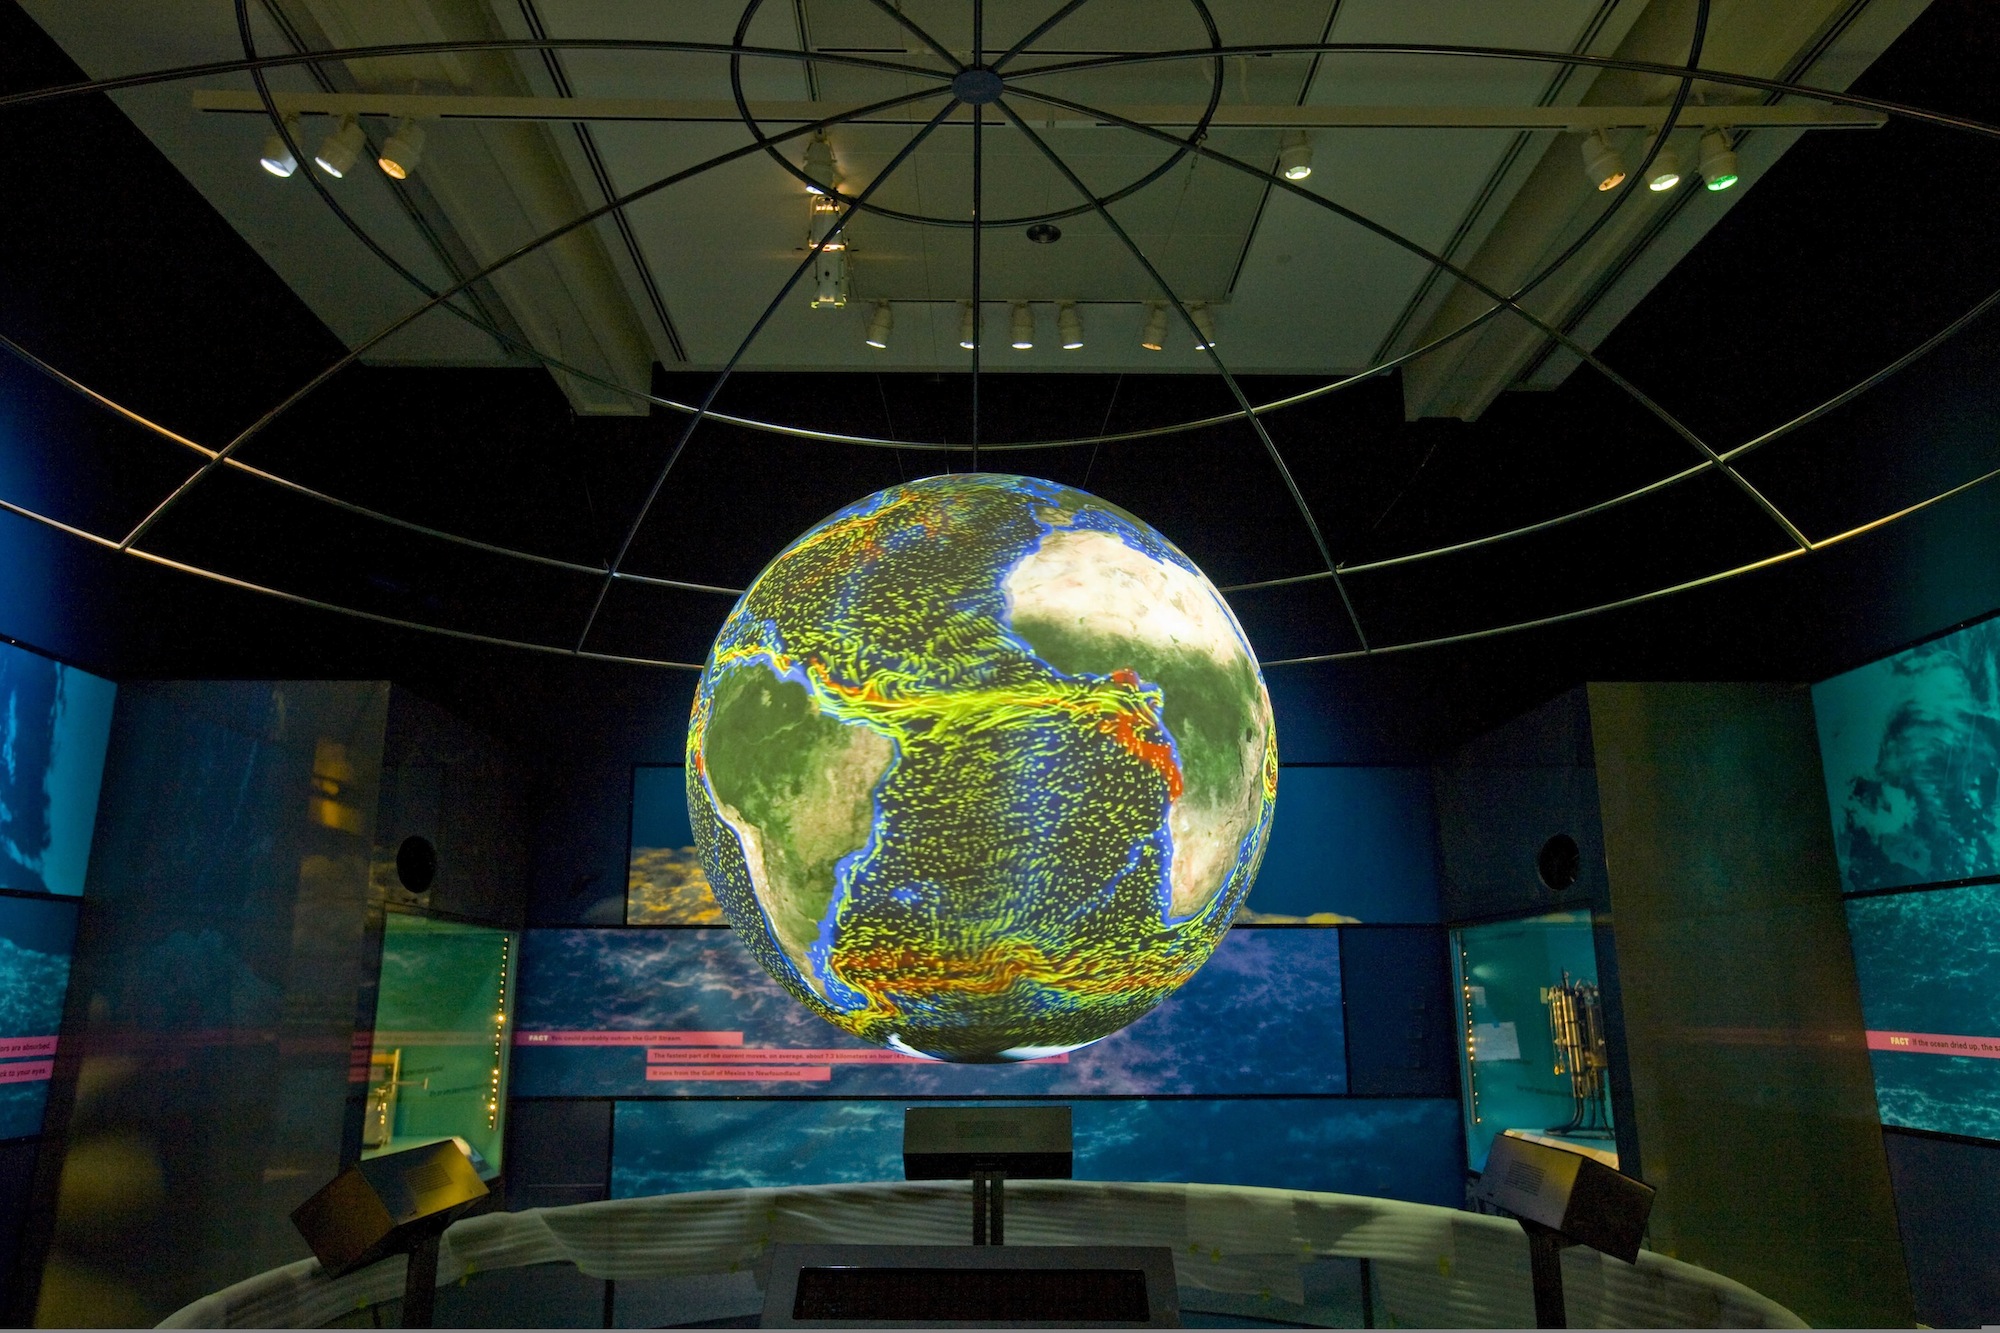 Science On a Sphere displays ocean currents as lines of red, yellow, green, and blue in an empty room. Behind it, some glass display cases are visible